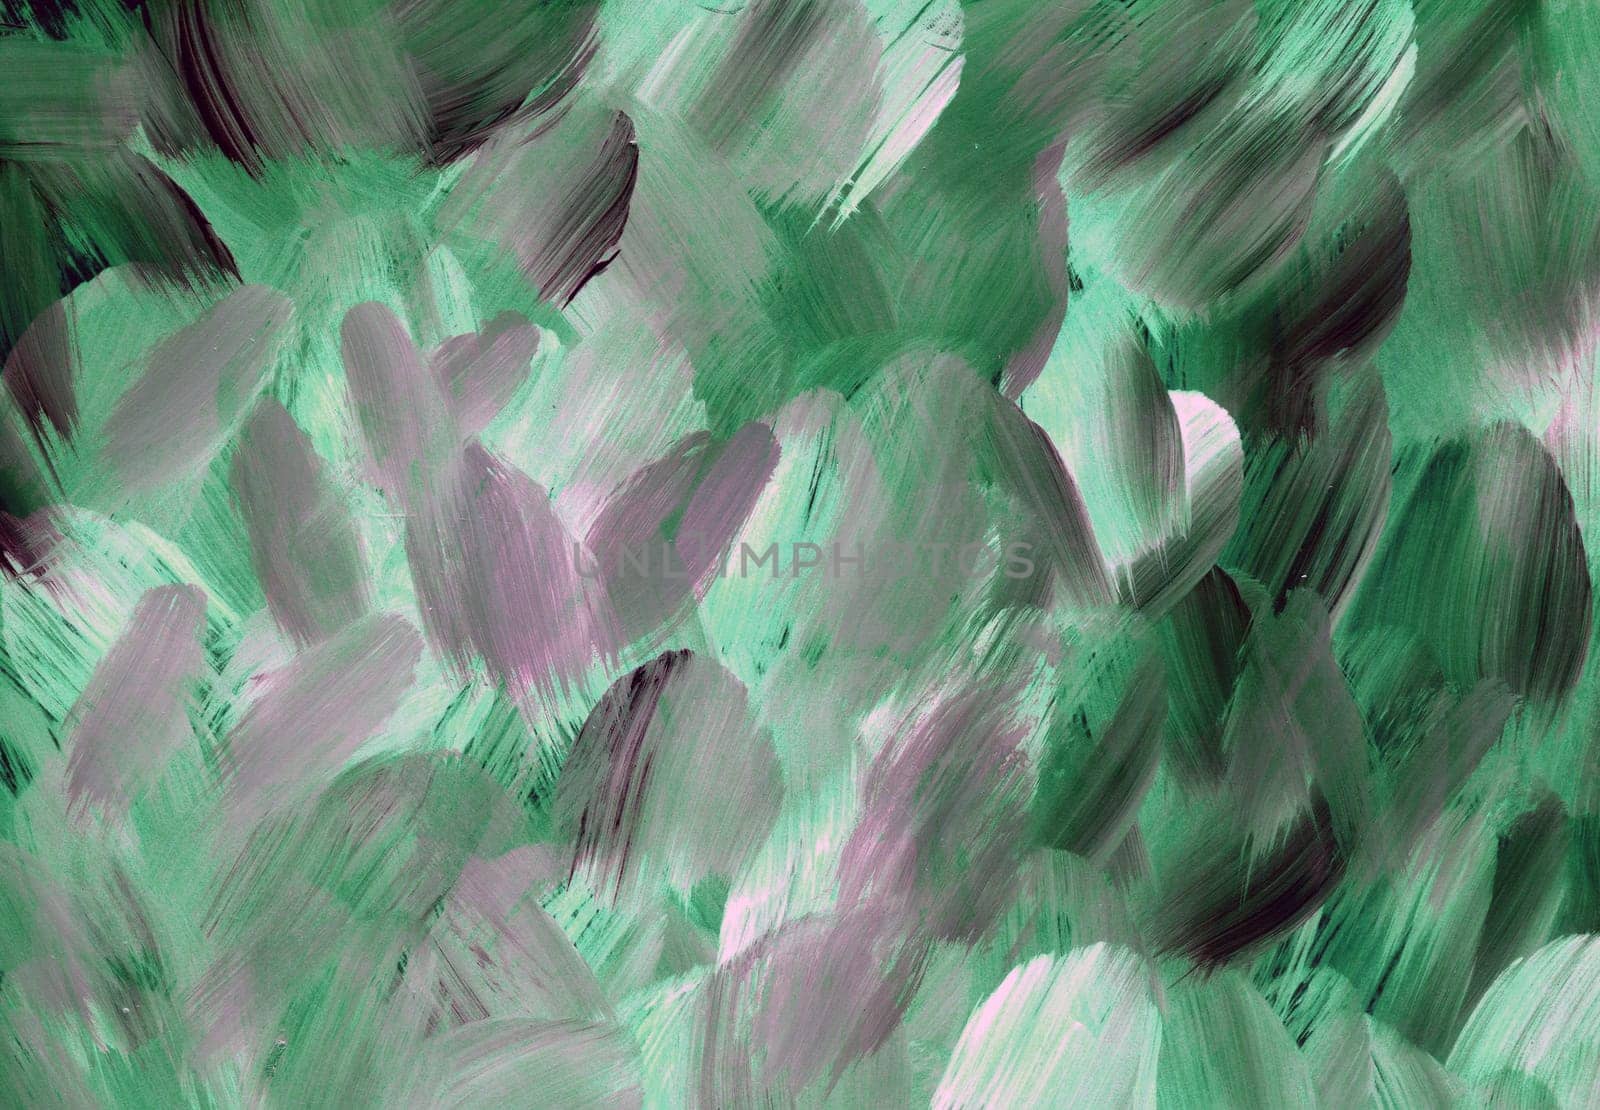 Picturesque Green blue pink acrylic oil painting texture